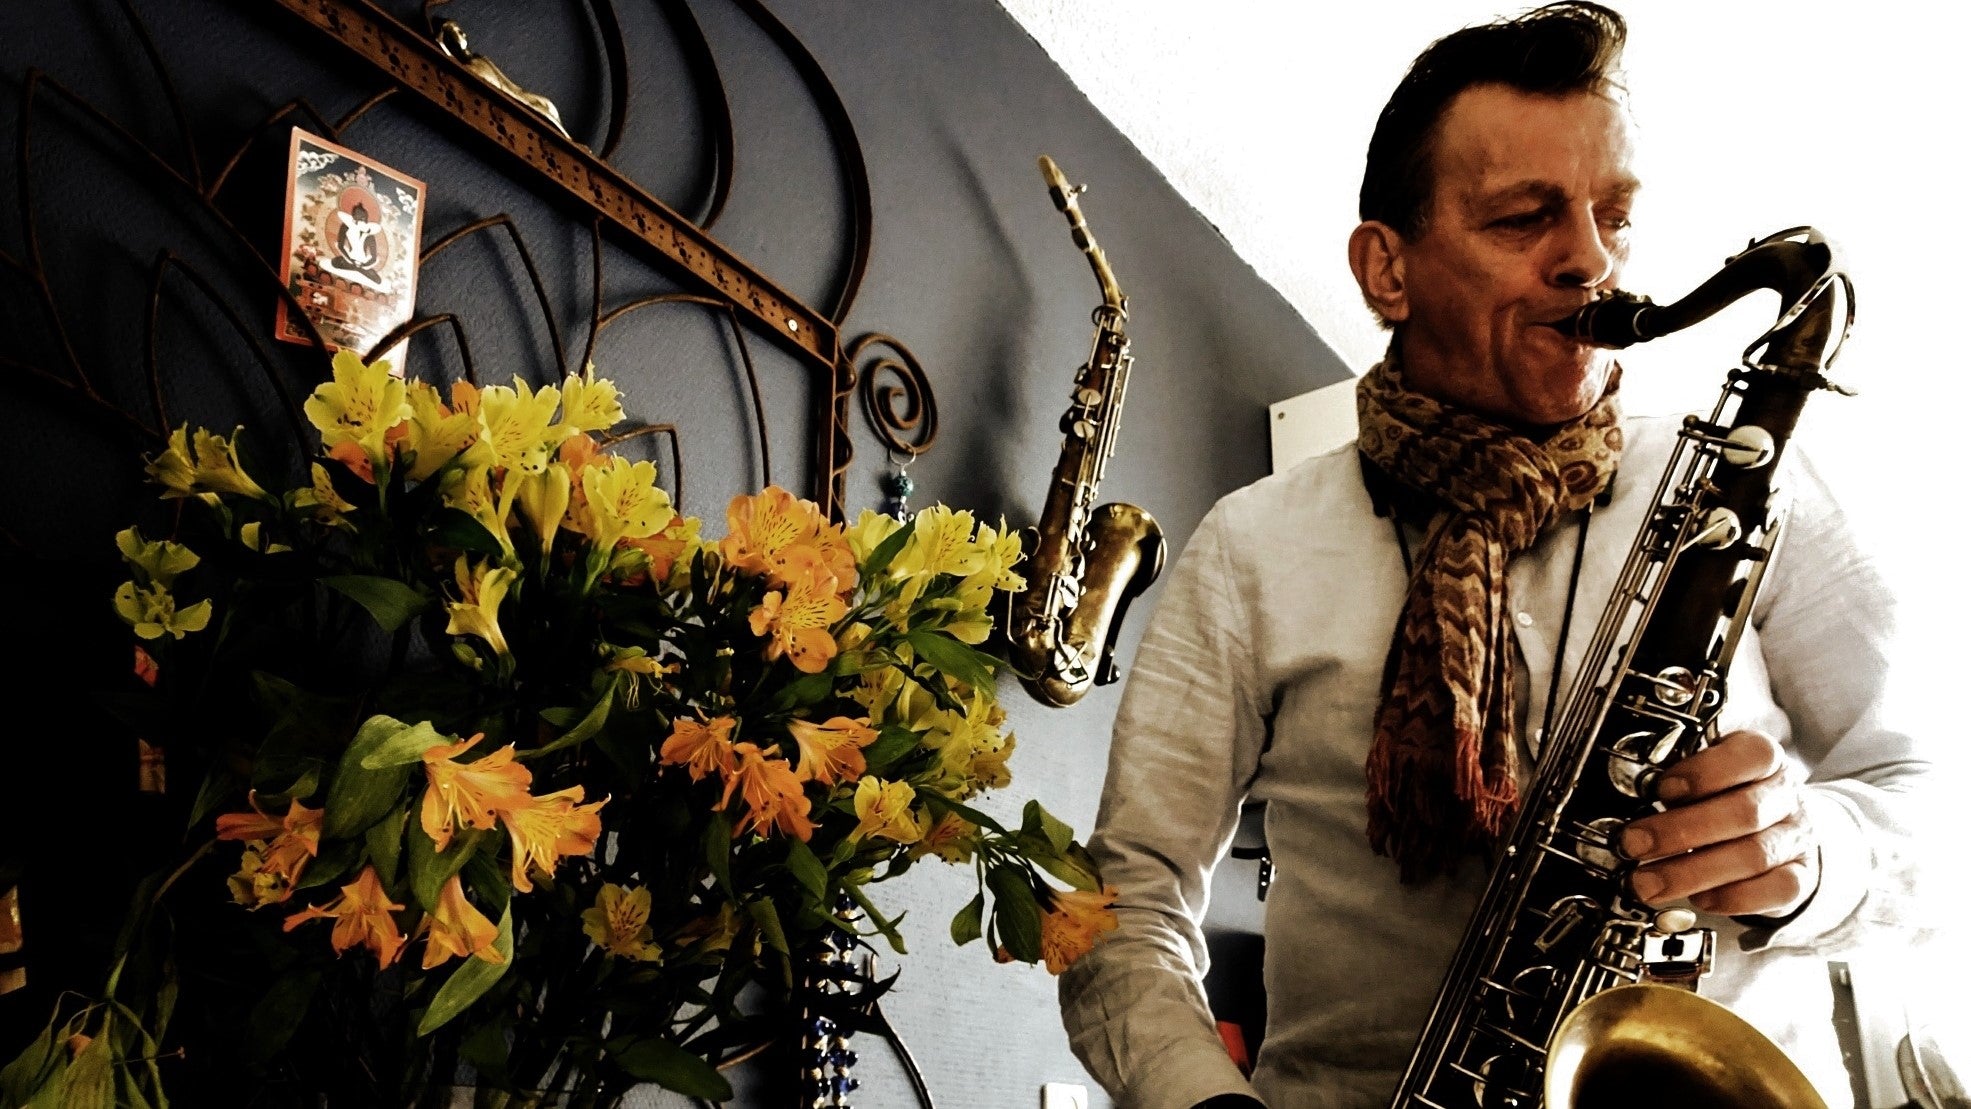 Man playing saxophone at home beside flowers and wallmounted stand with alto saxophone.